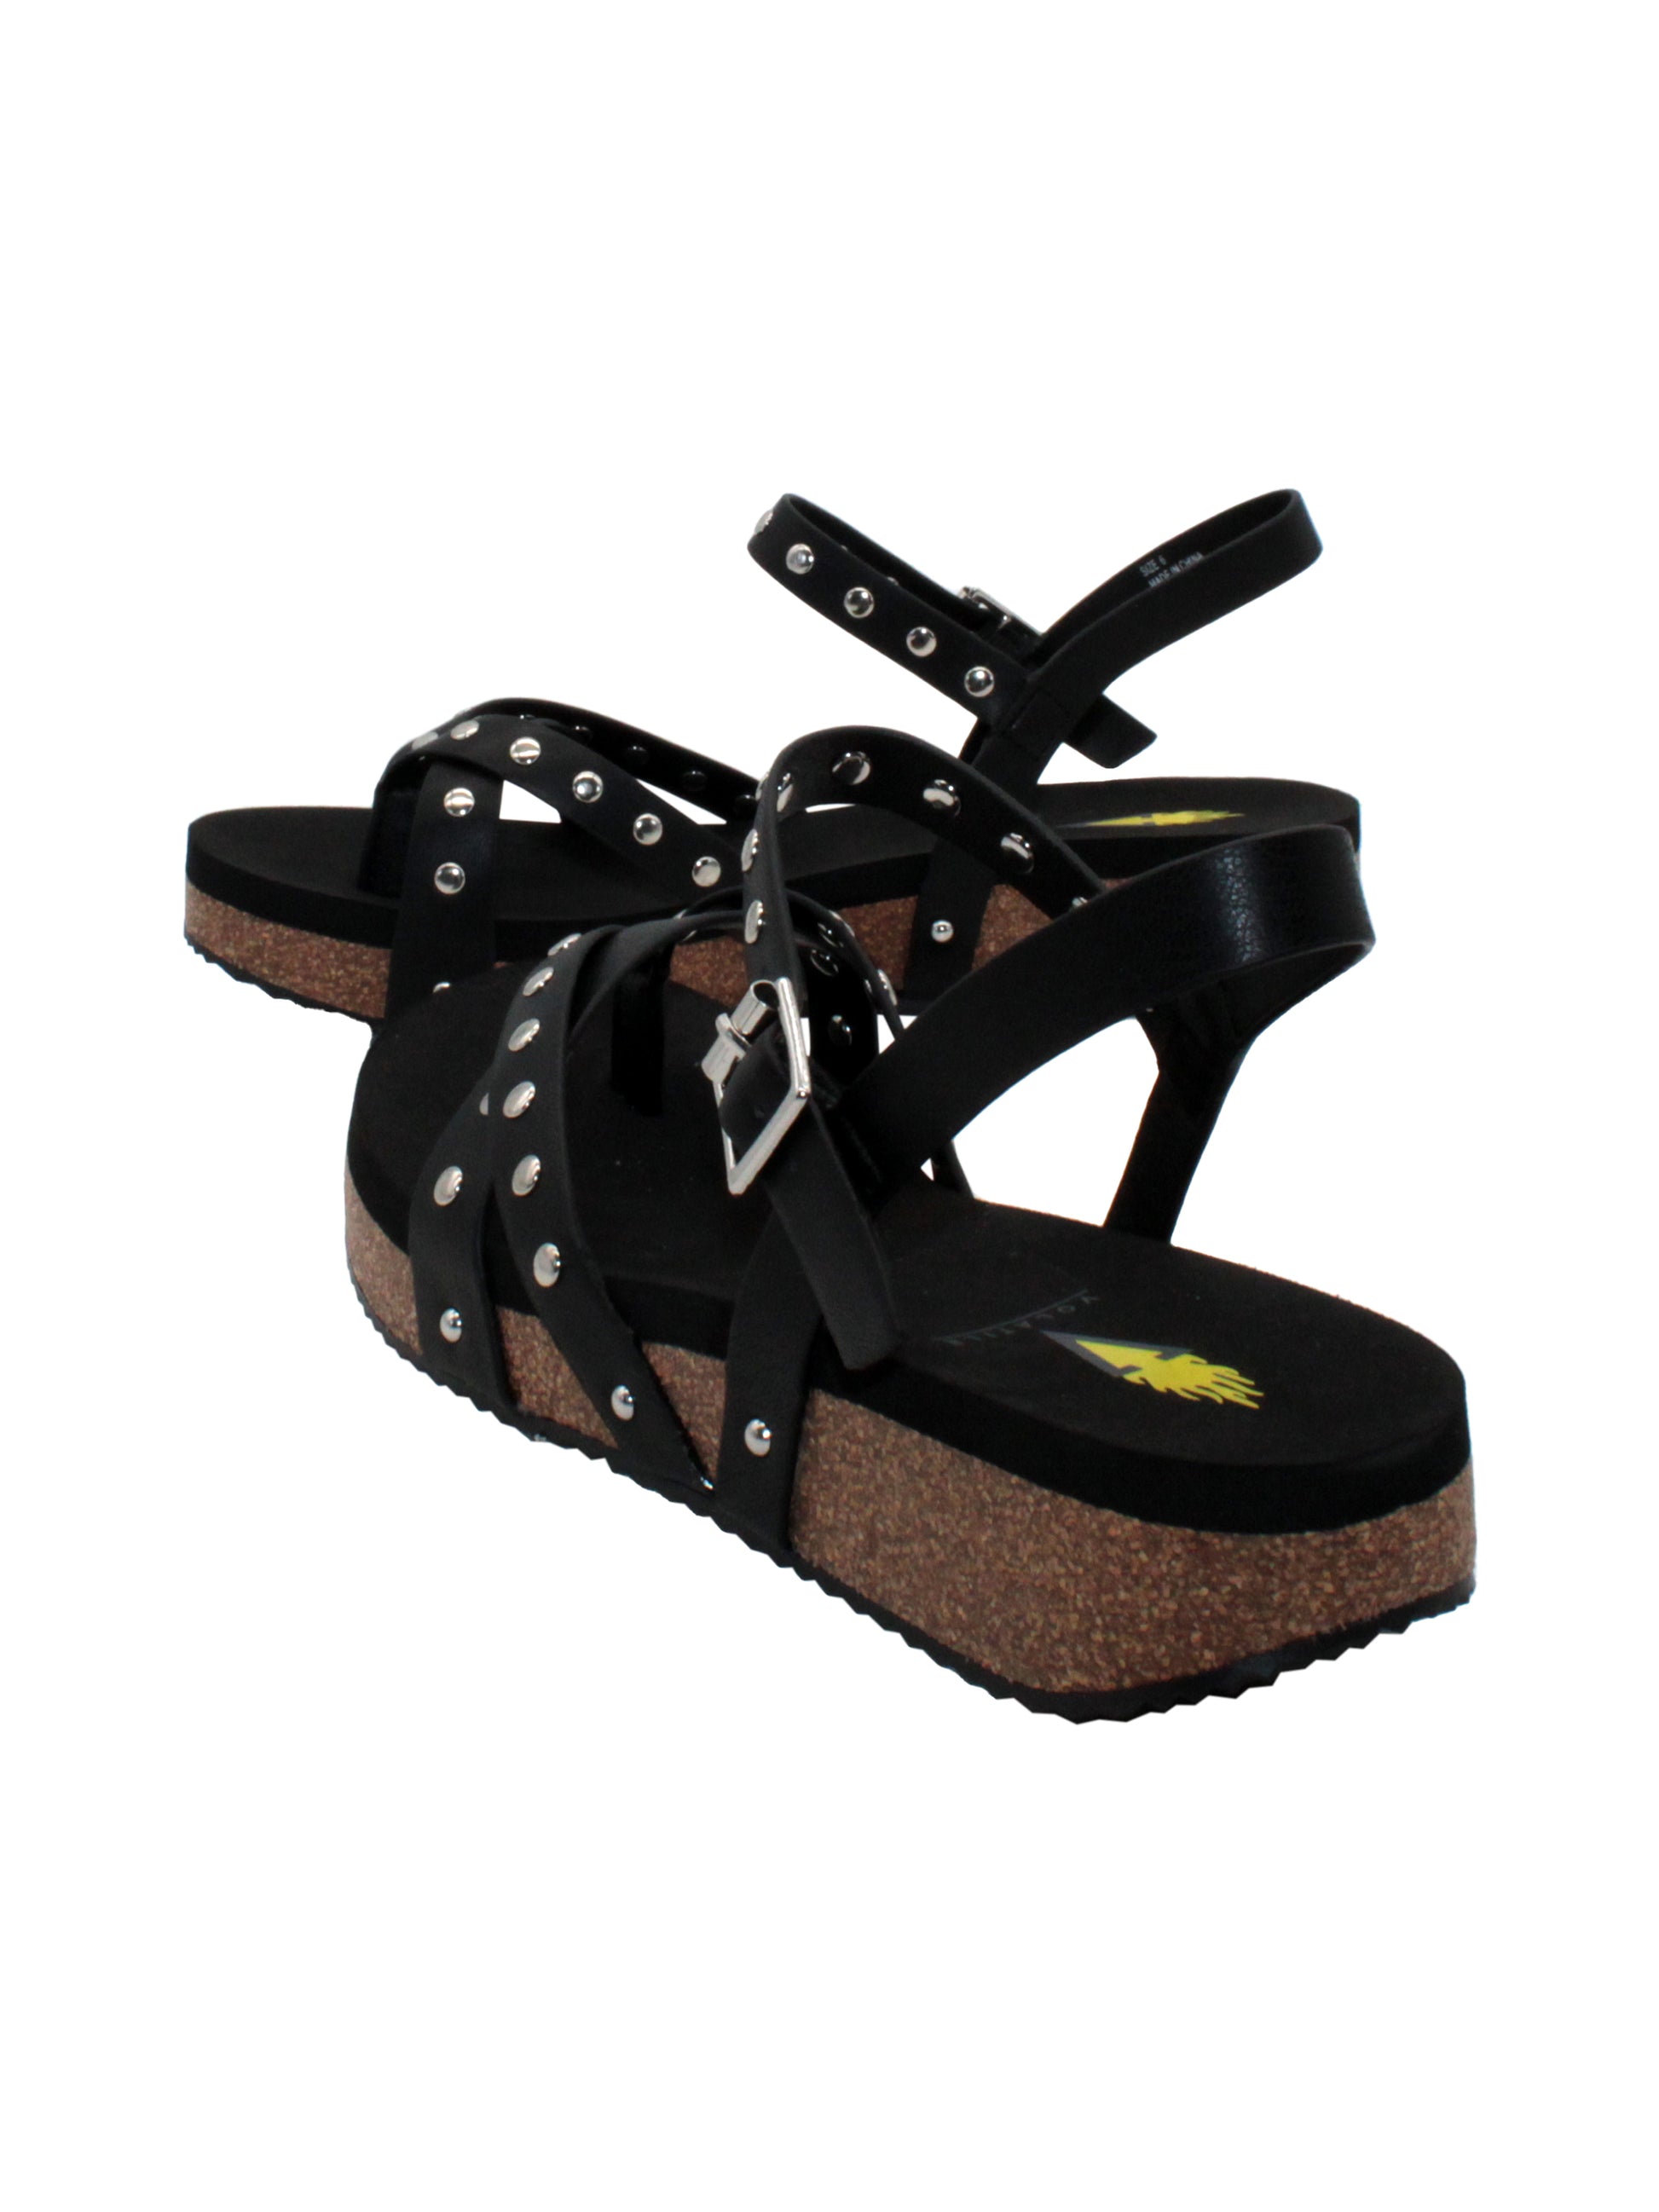   Volatile's Kelton sandal in a vegan leather is our warm weather staple. The low platform wedge adds a subtle lift while offering stability, perfect for dressing up weekend wear or keeping fashionably comfortable at the next outdoor party. Style them with everything, from shorts to dresses, and more. black 4